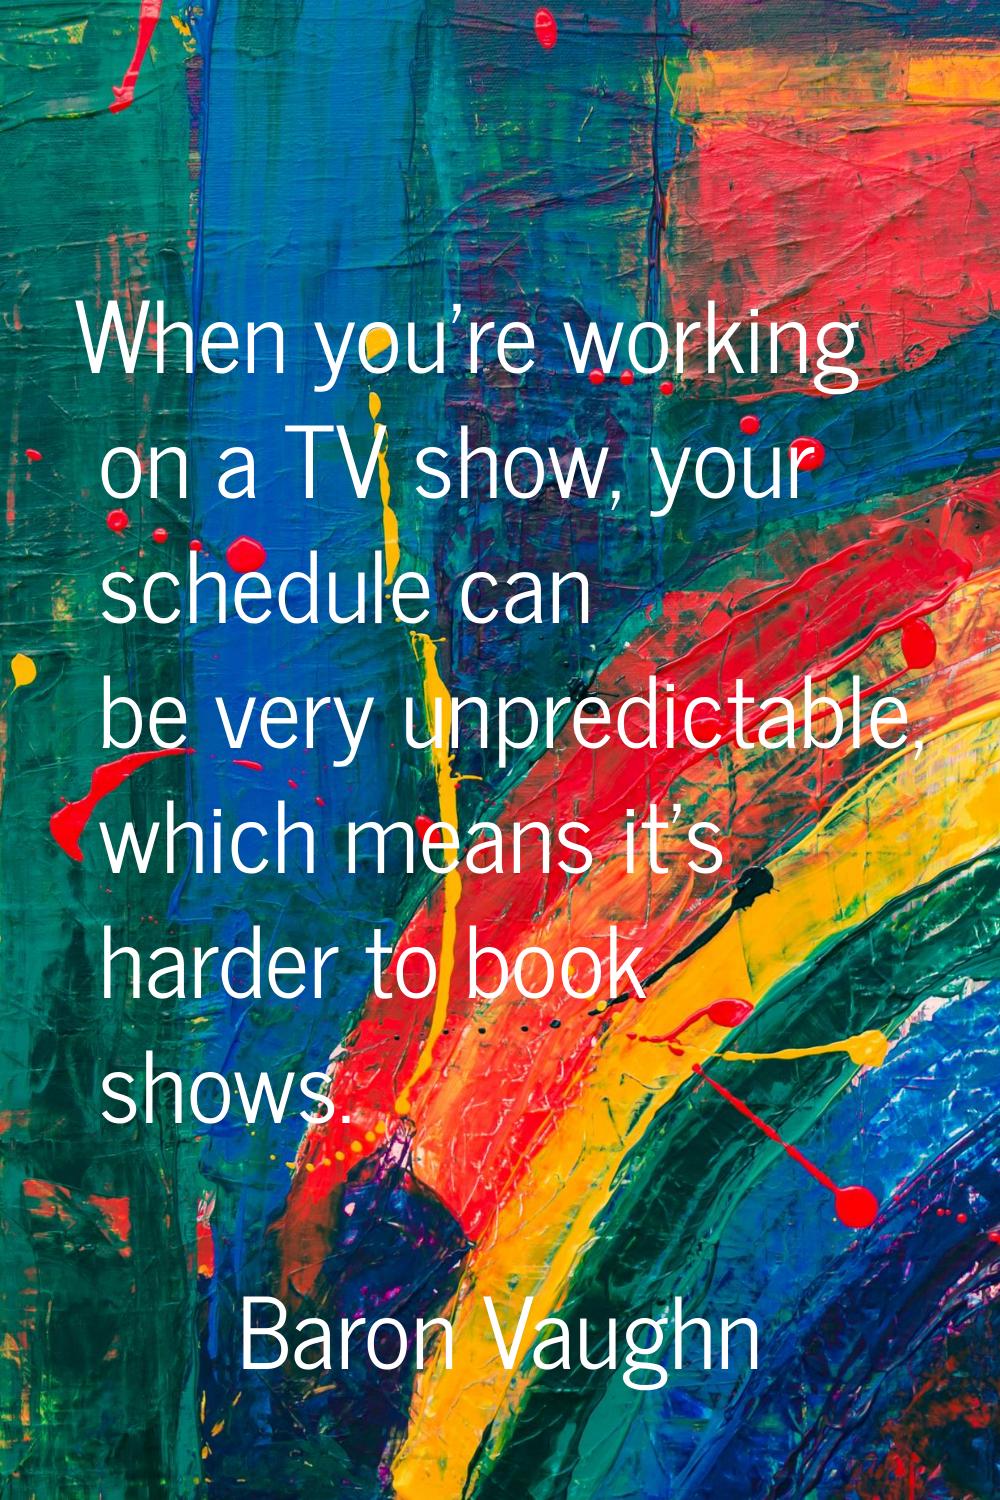 When you're working on a TV show, your schedule can be very unpredictable, which means it's harder 